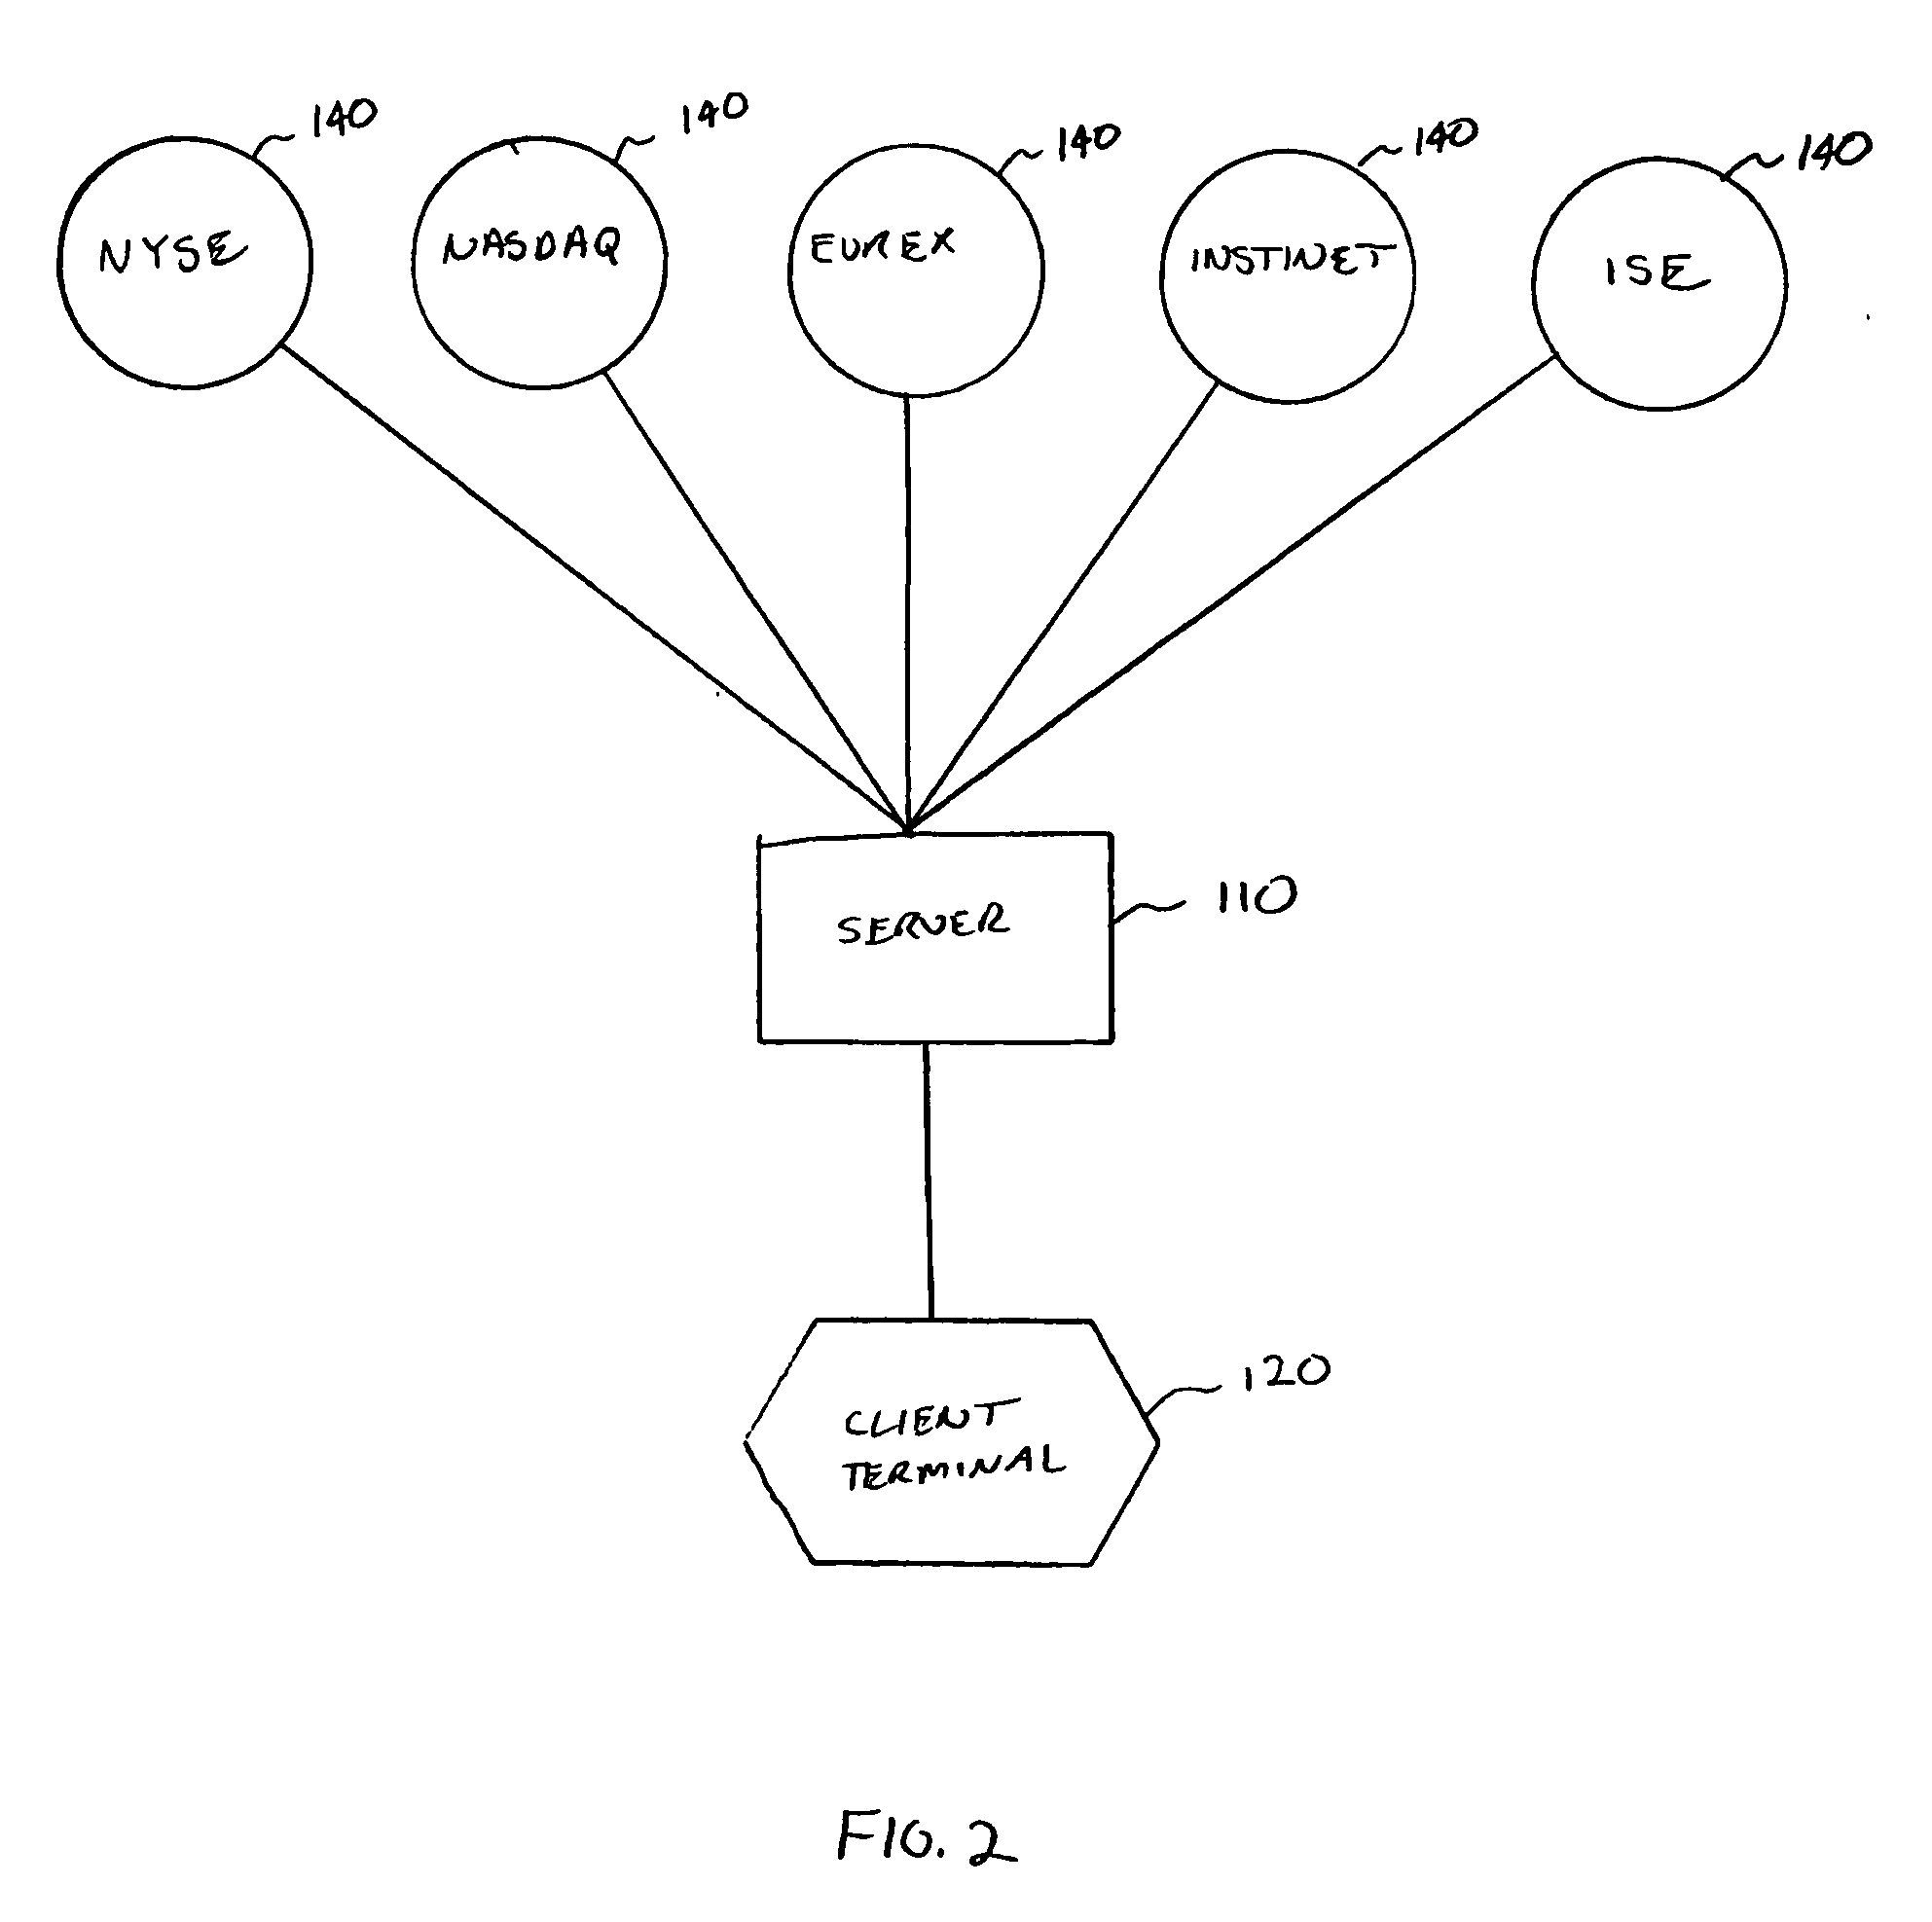 System and method for trading financial instruments using multiple accounts